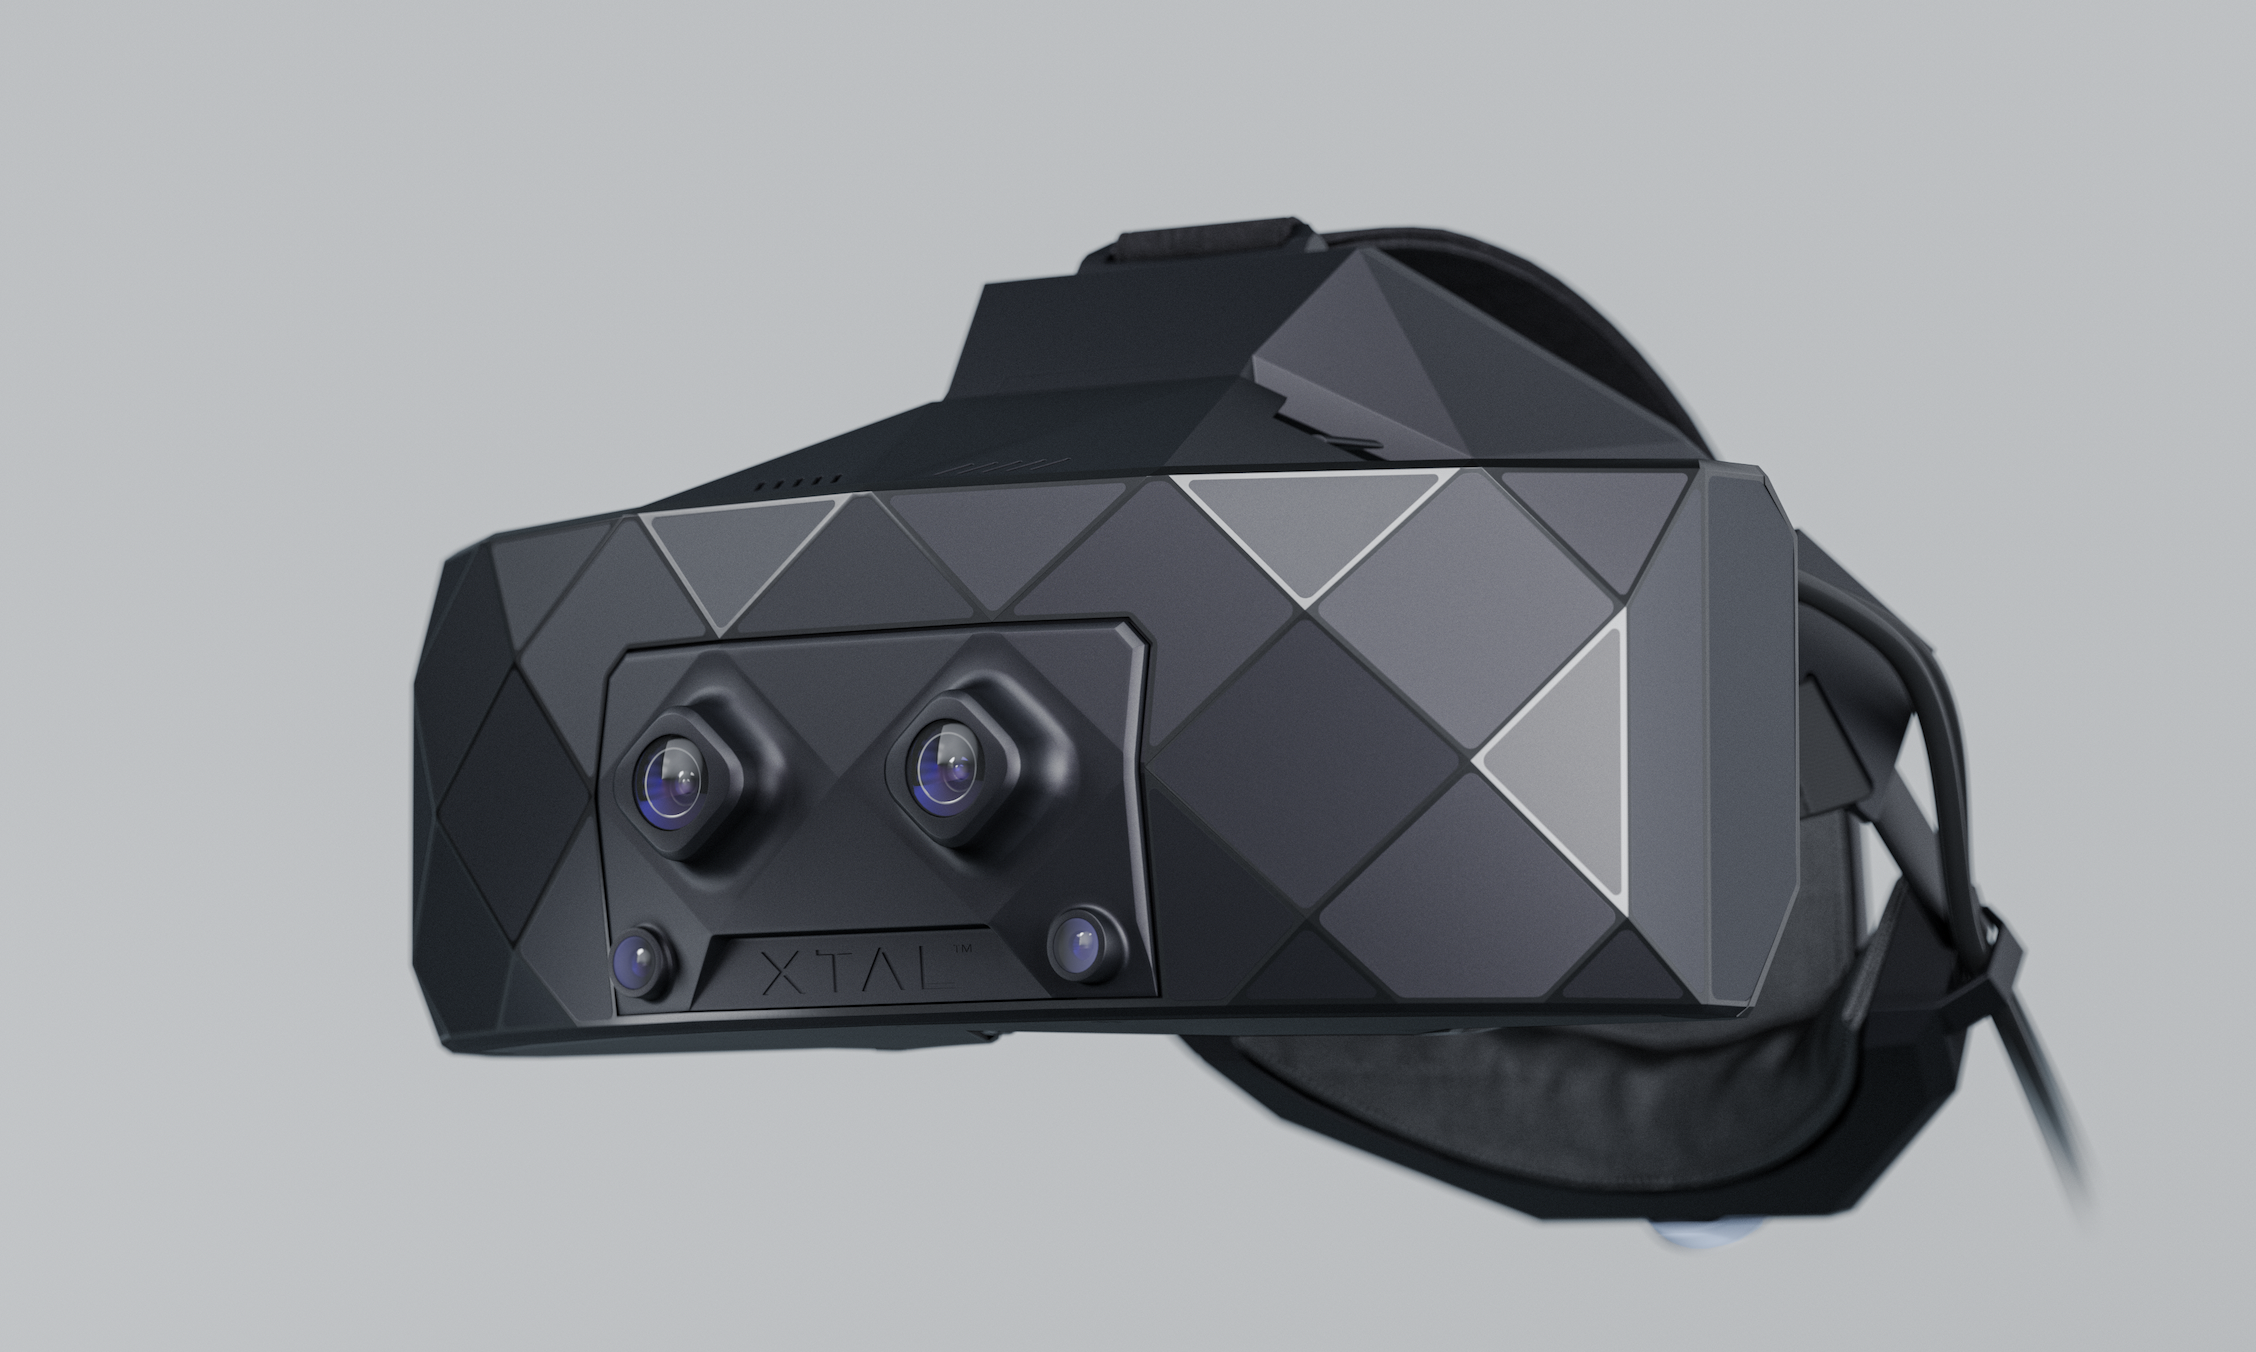 Introducing the XTAL 3 – the world’s most advanced virtual & mixed reality simulation headset - Vrgineers.com